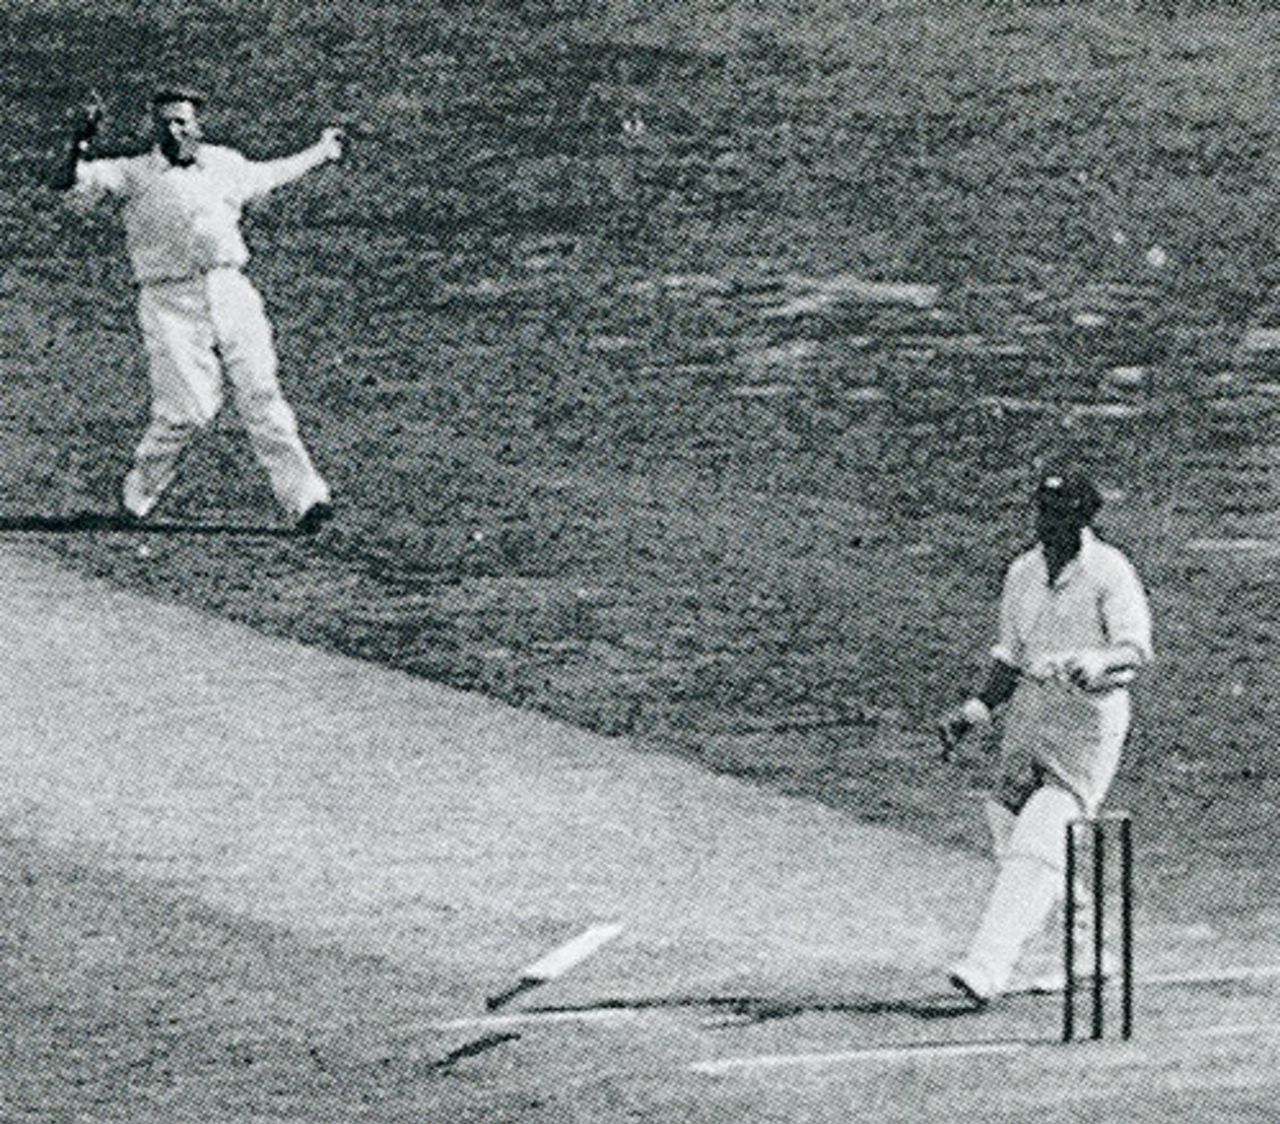 Bill Woodfull drops his bat after being hit by  Harold Larwood, Australia v England, 3rd Test, Adelaide, January 14, 1933